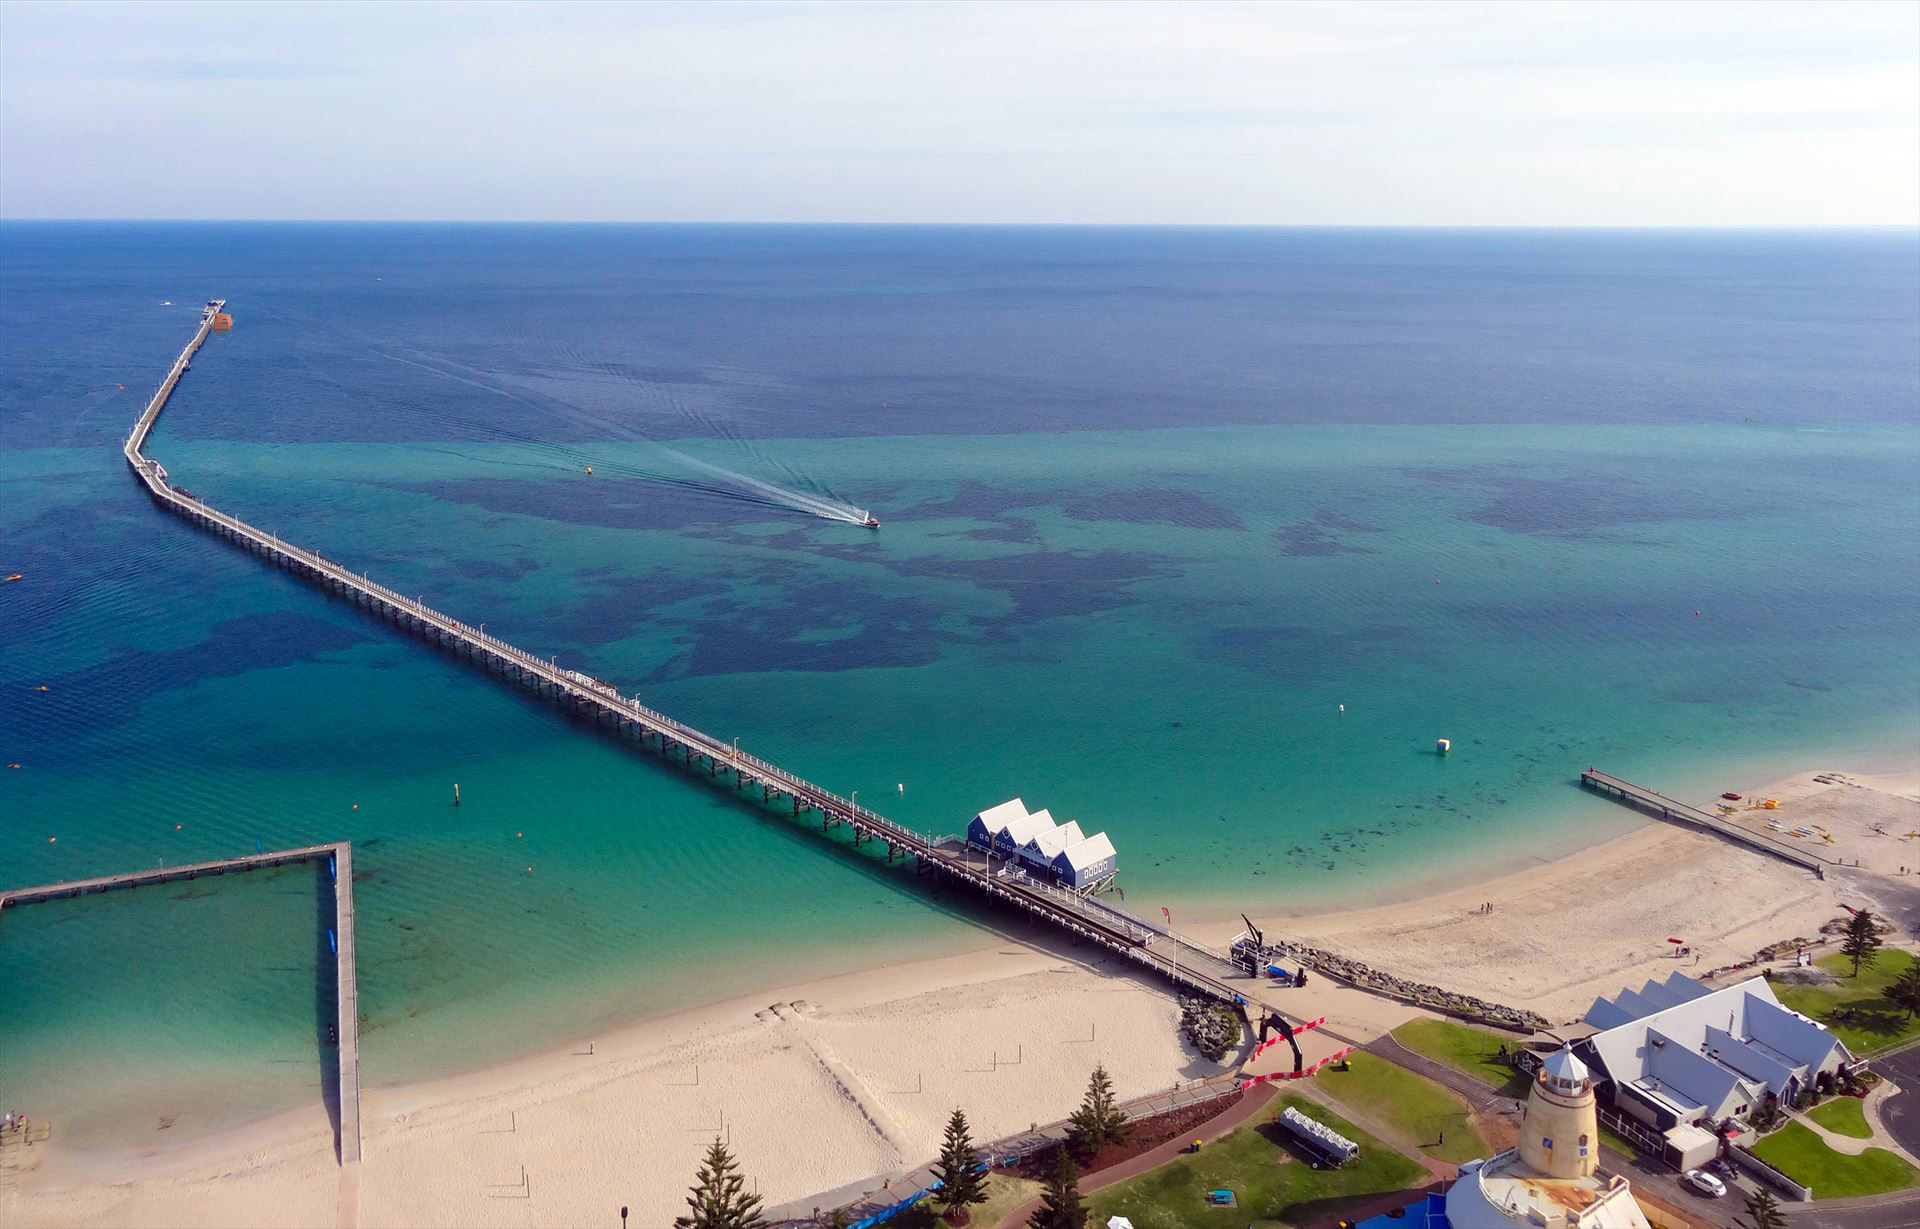 Aerial view of the ROCK at the end of the Busselton Jetty pier